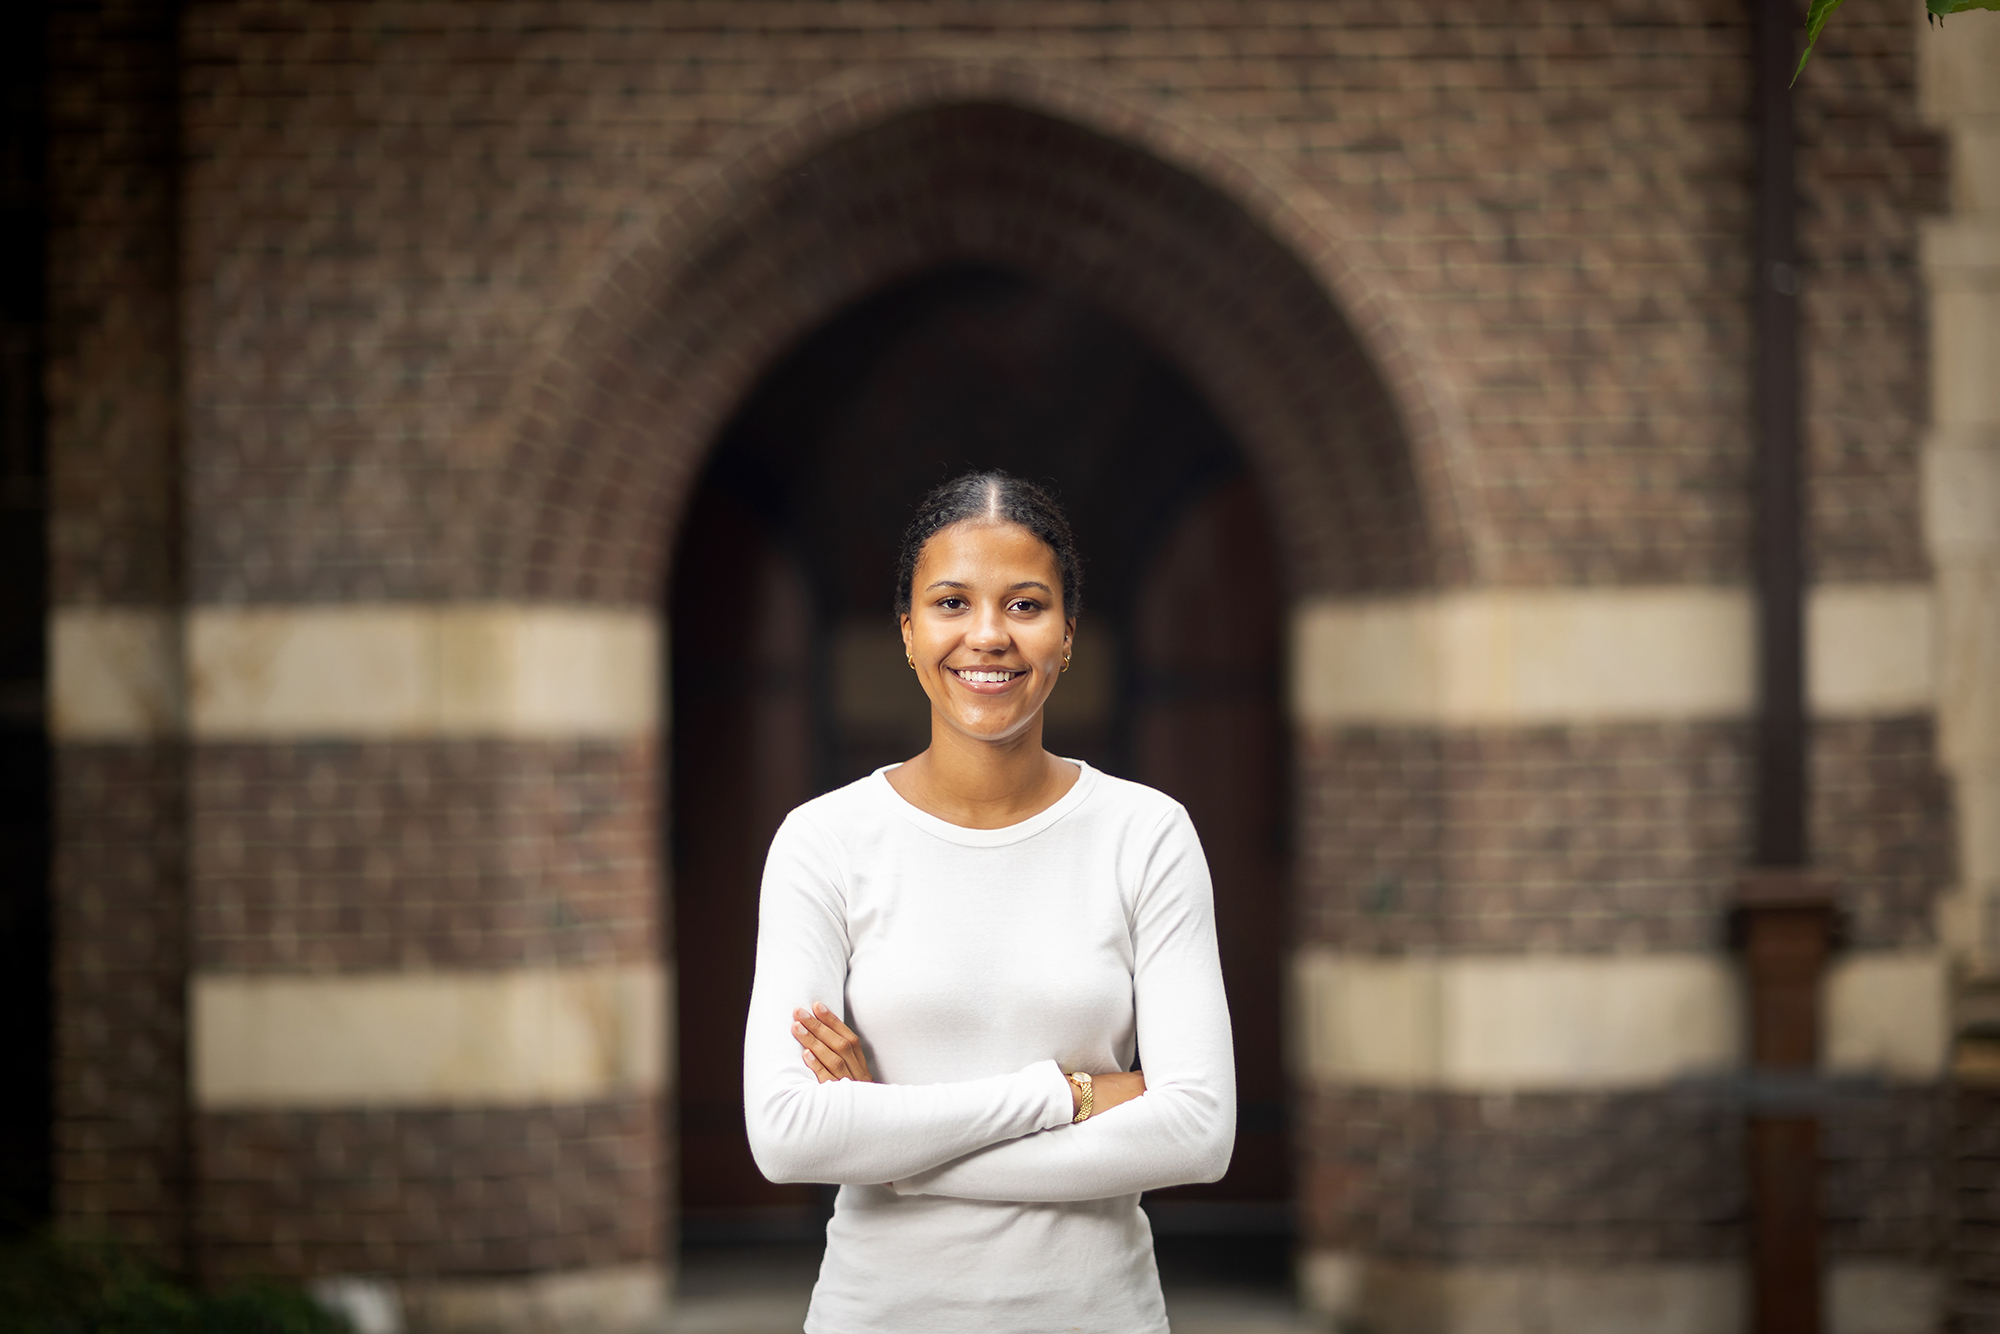 Penn rising fourth-year Sophie Mwaisela stands in front of a brick archway with her arms crossed.